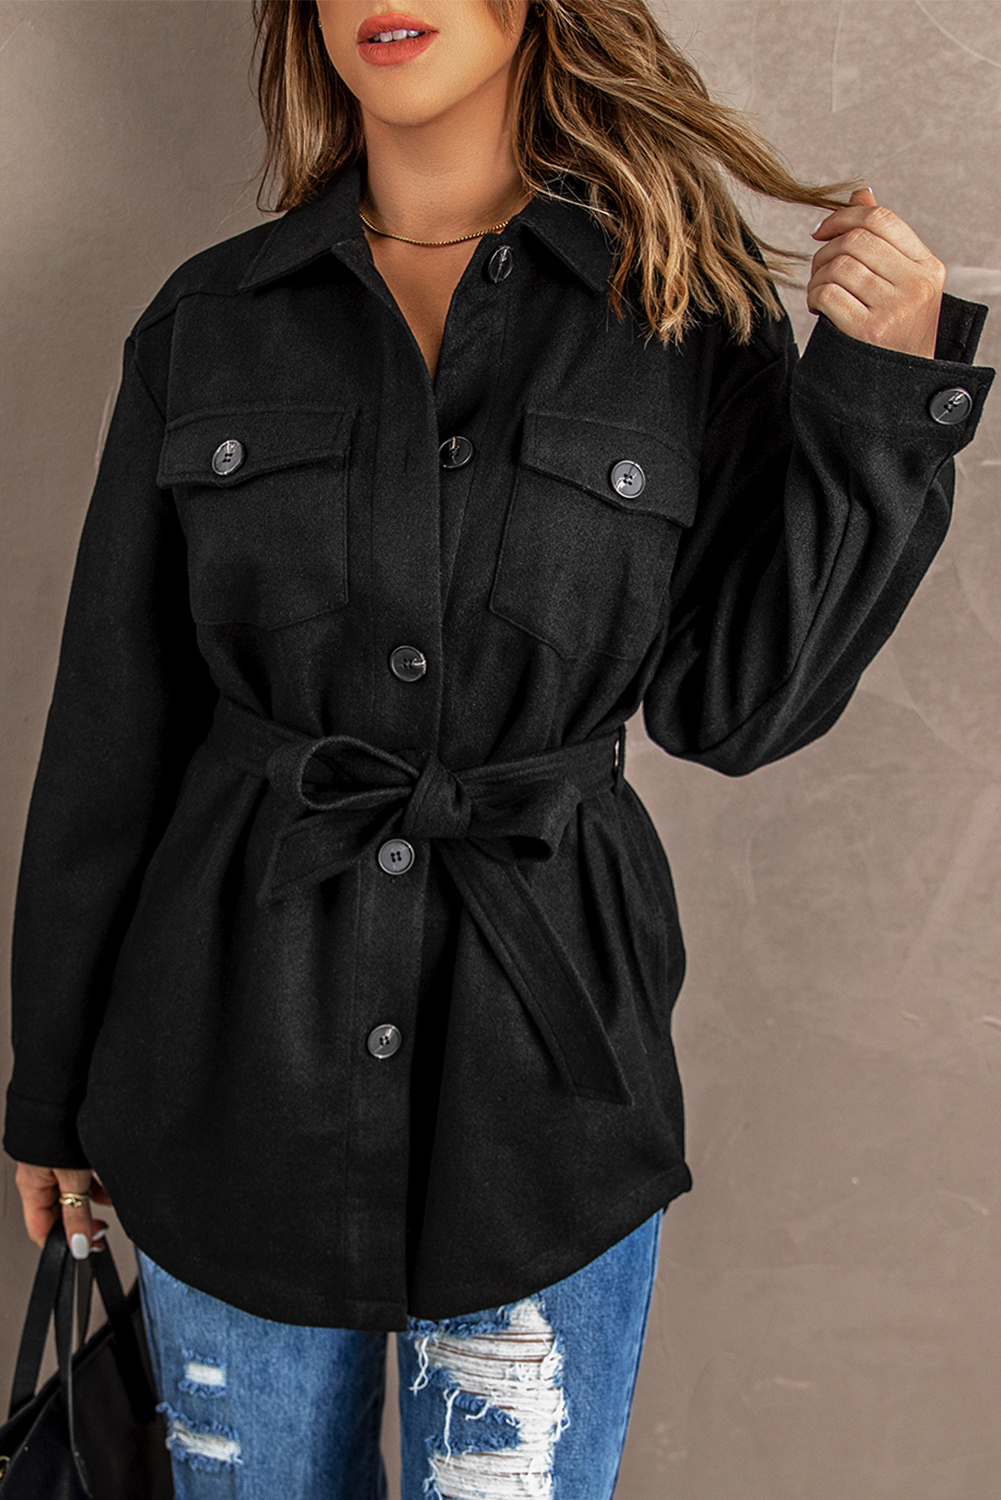 New arrivals 2023 Black Lapel Button Up COAT with Chest Pockets